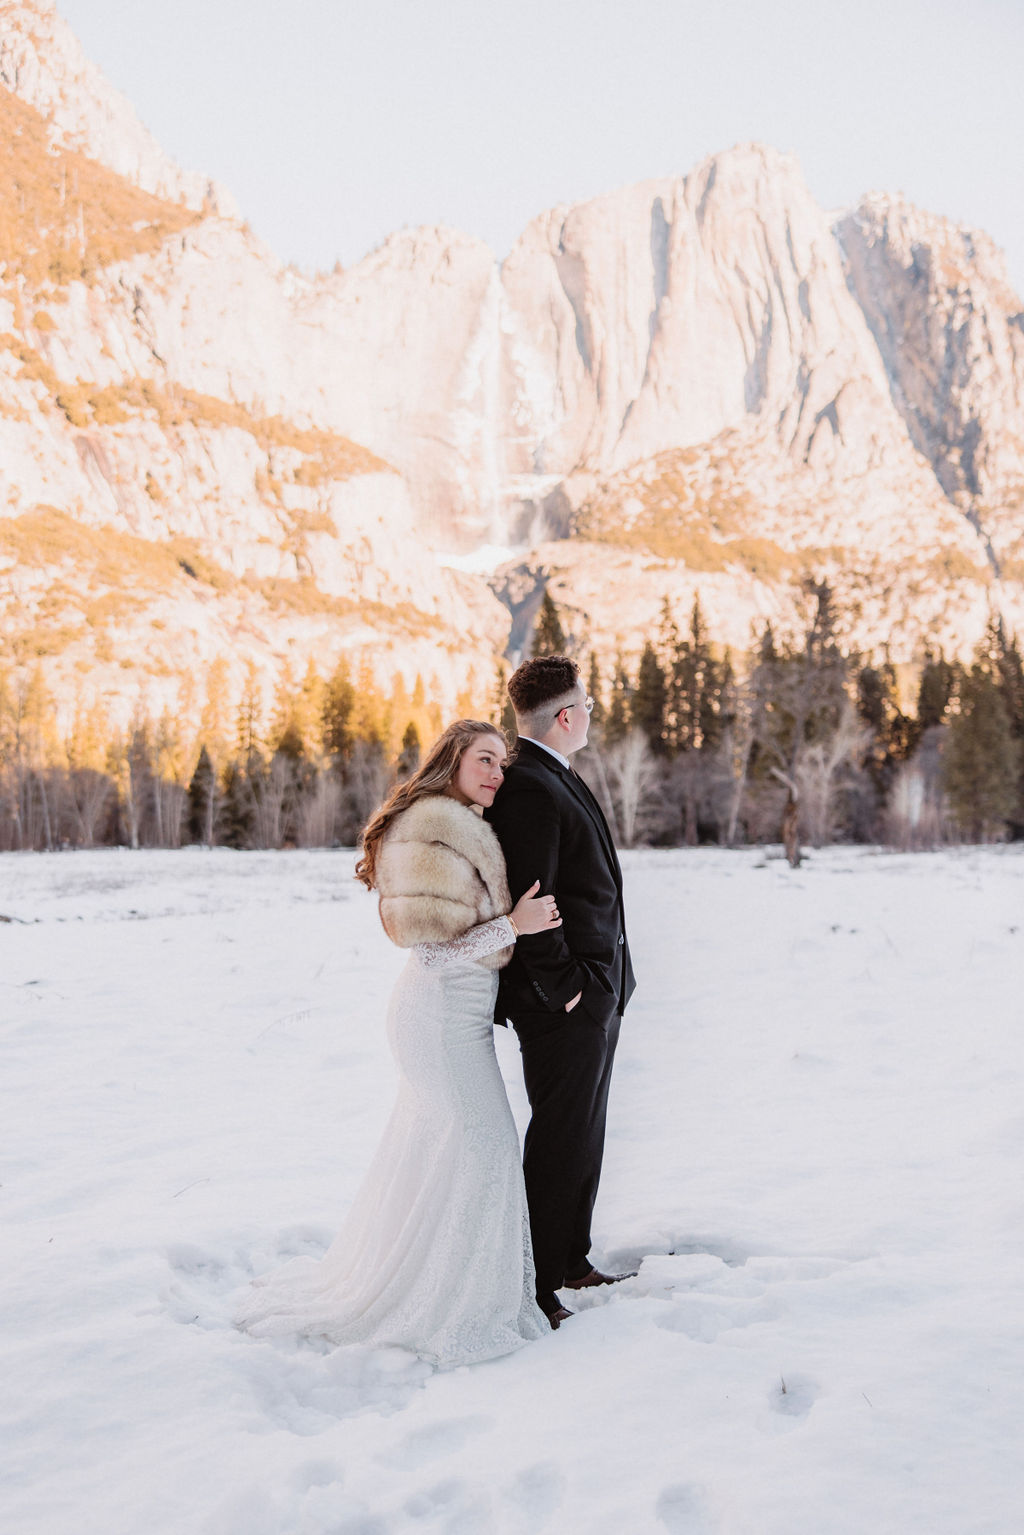 A couple holding hands and walking in the snow with a mountainous backdrop at Yosemite National Park